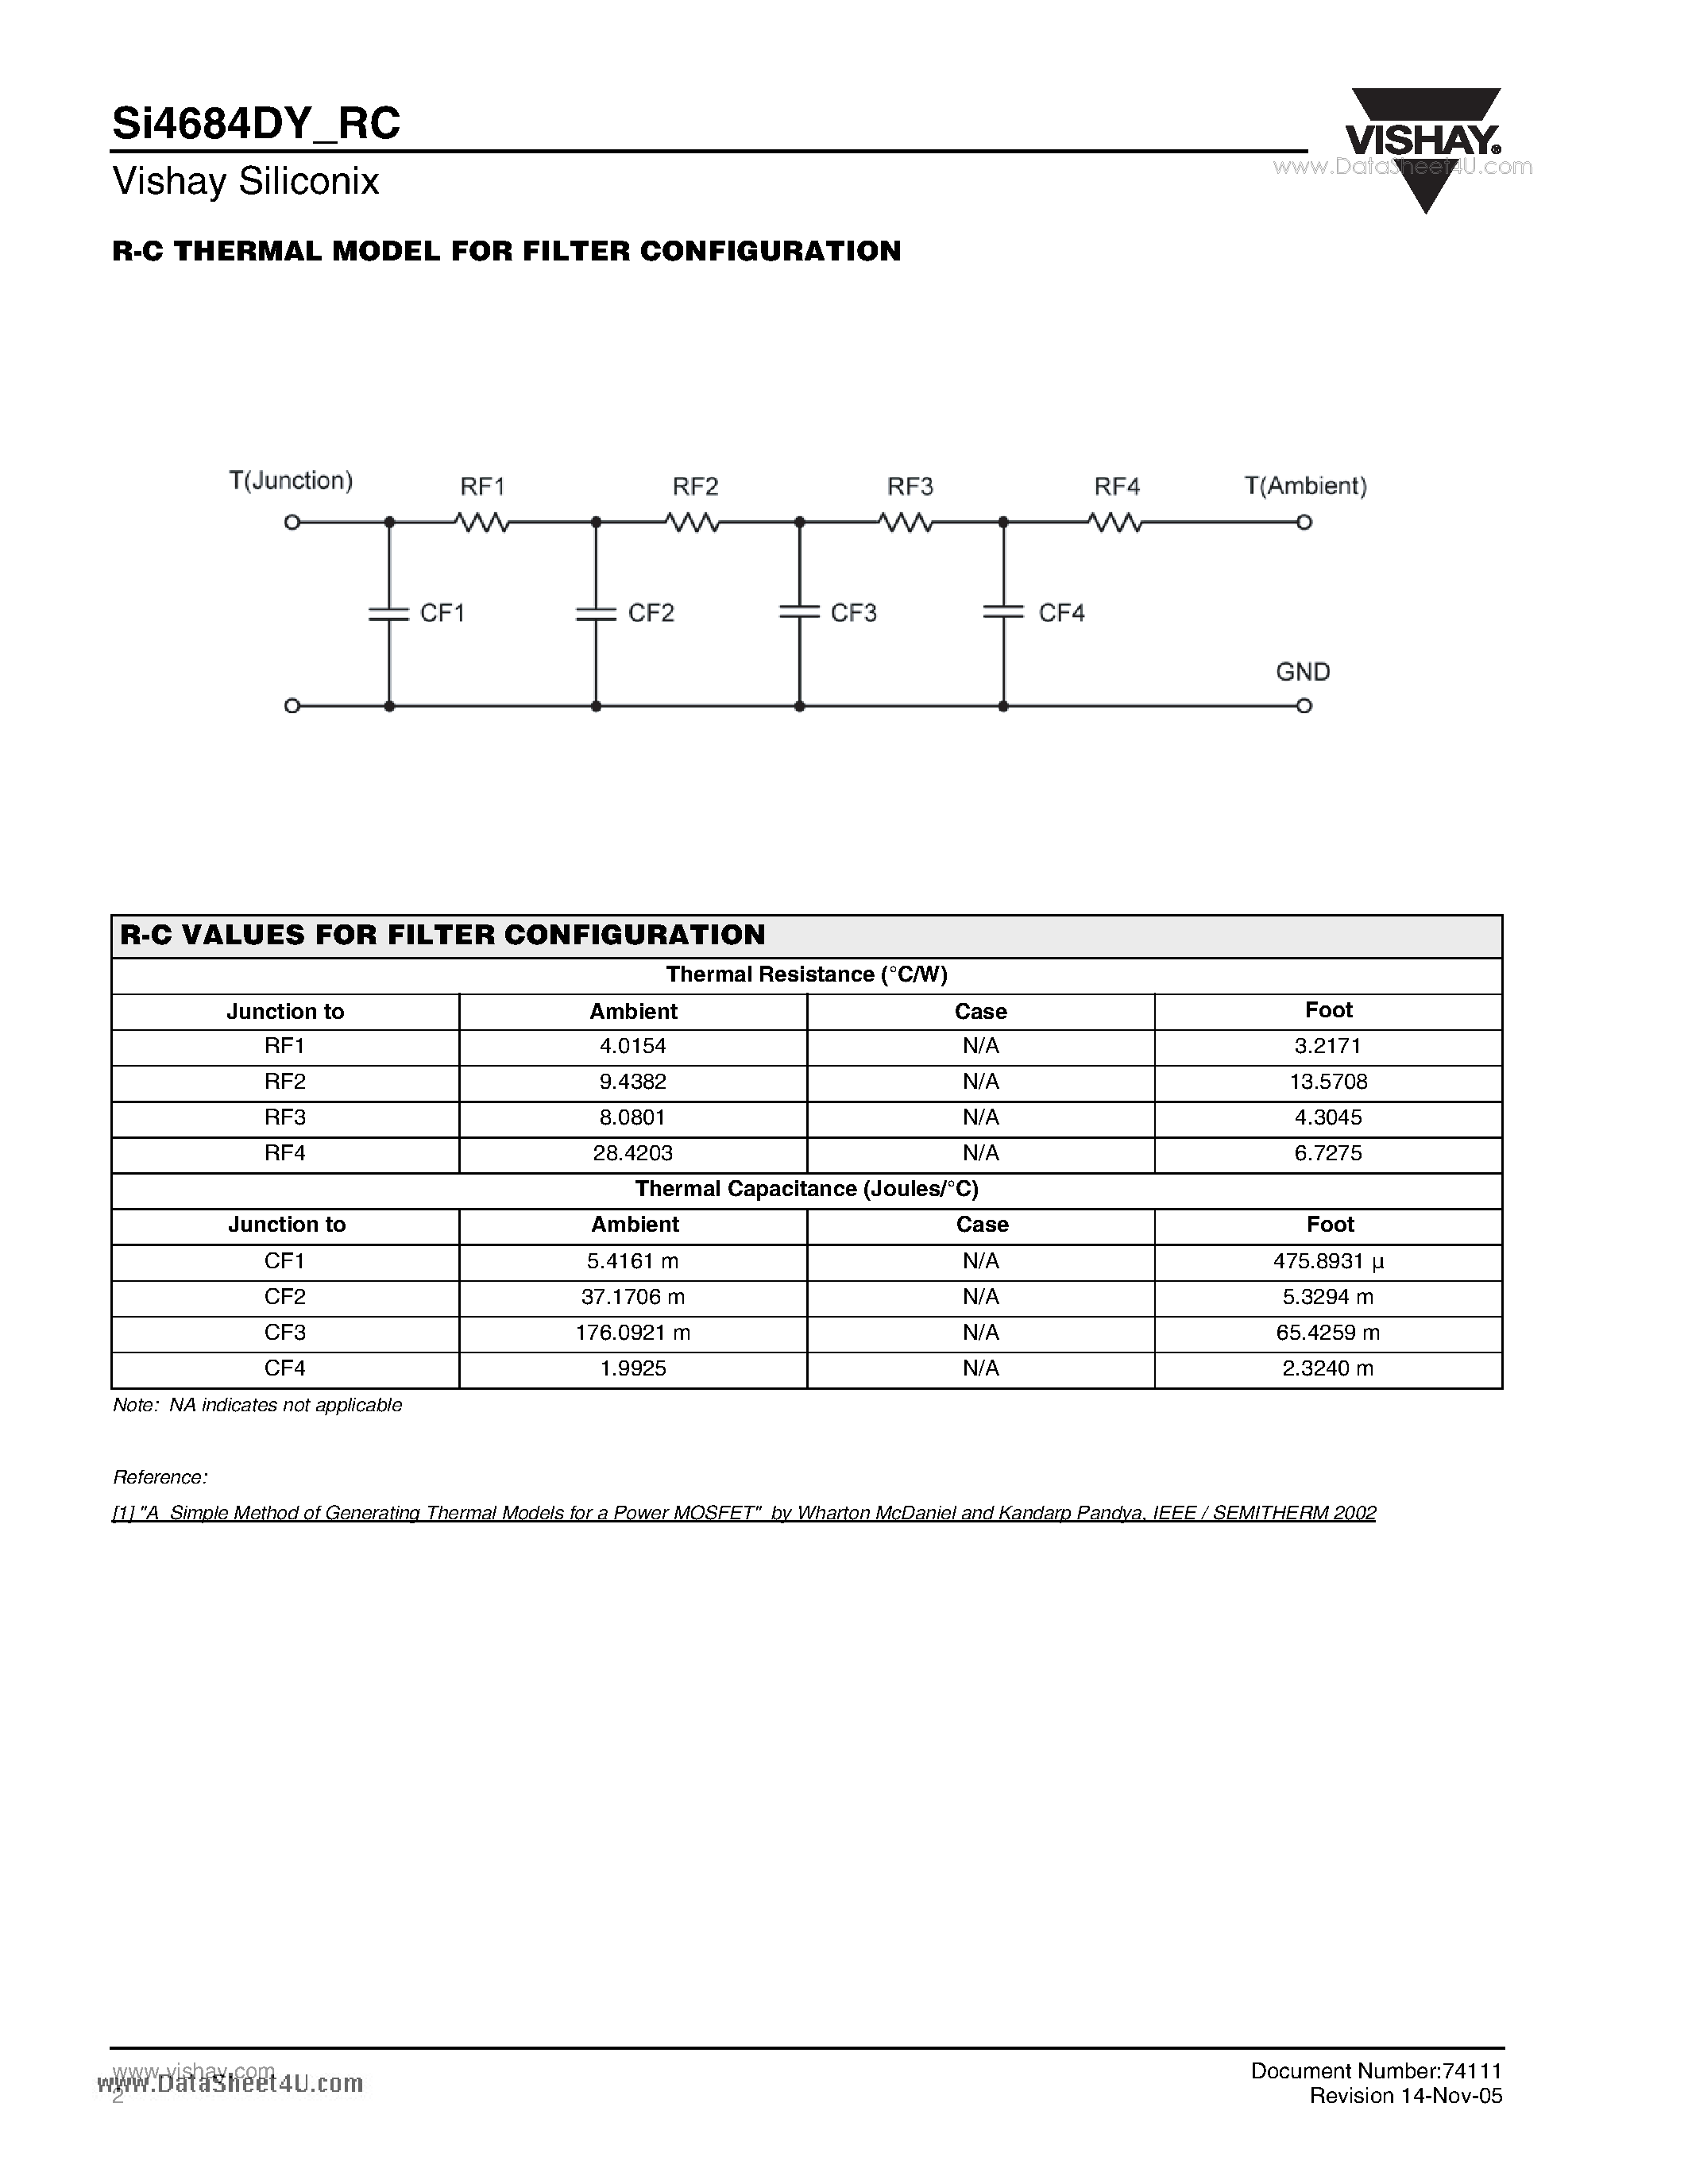 Datasheet SI4684DY_RC - R-C Thermal Model Parameters page 2